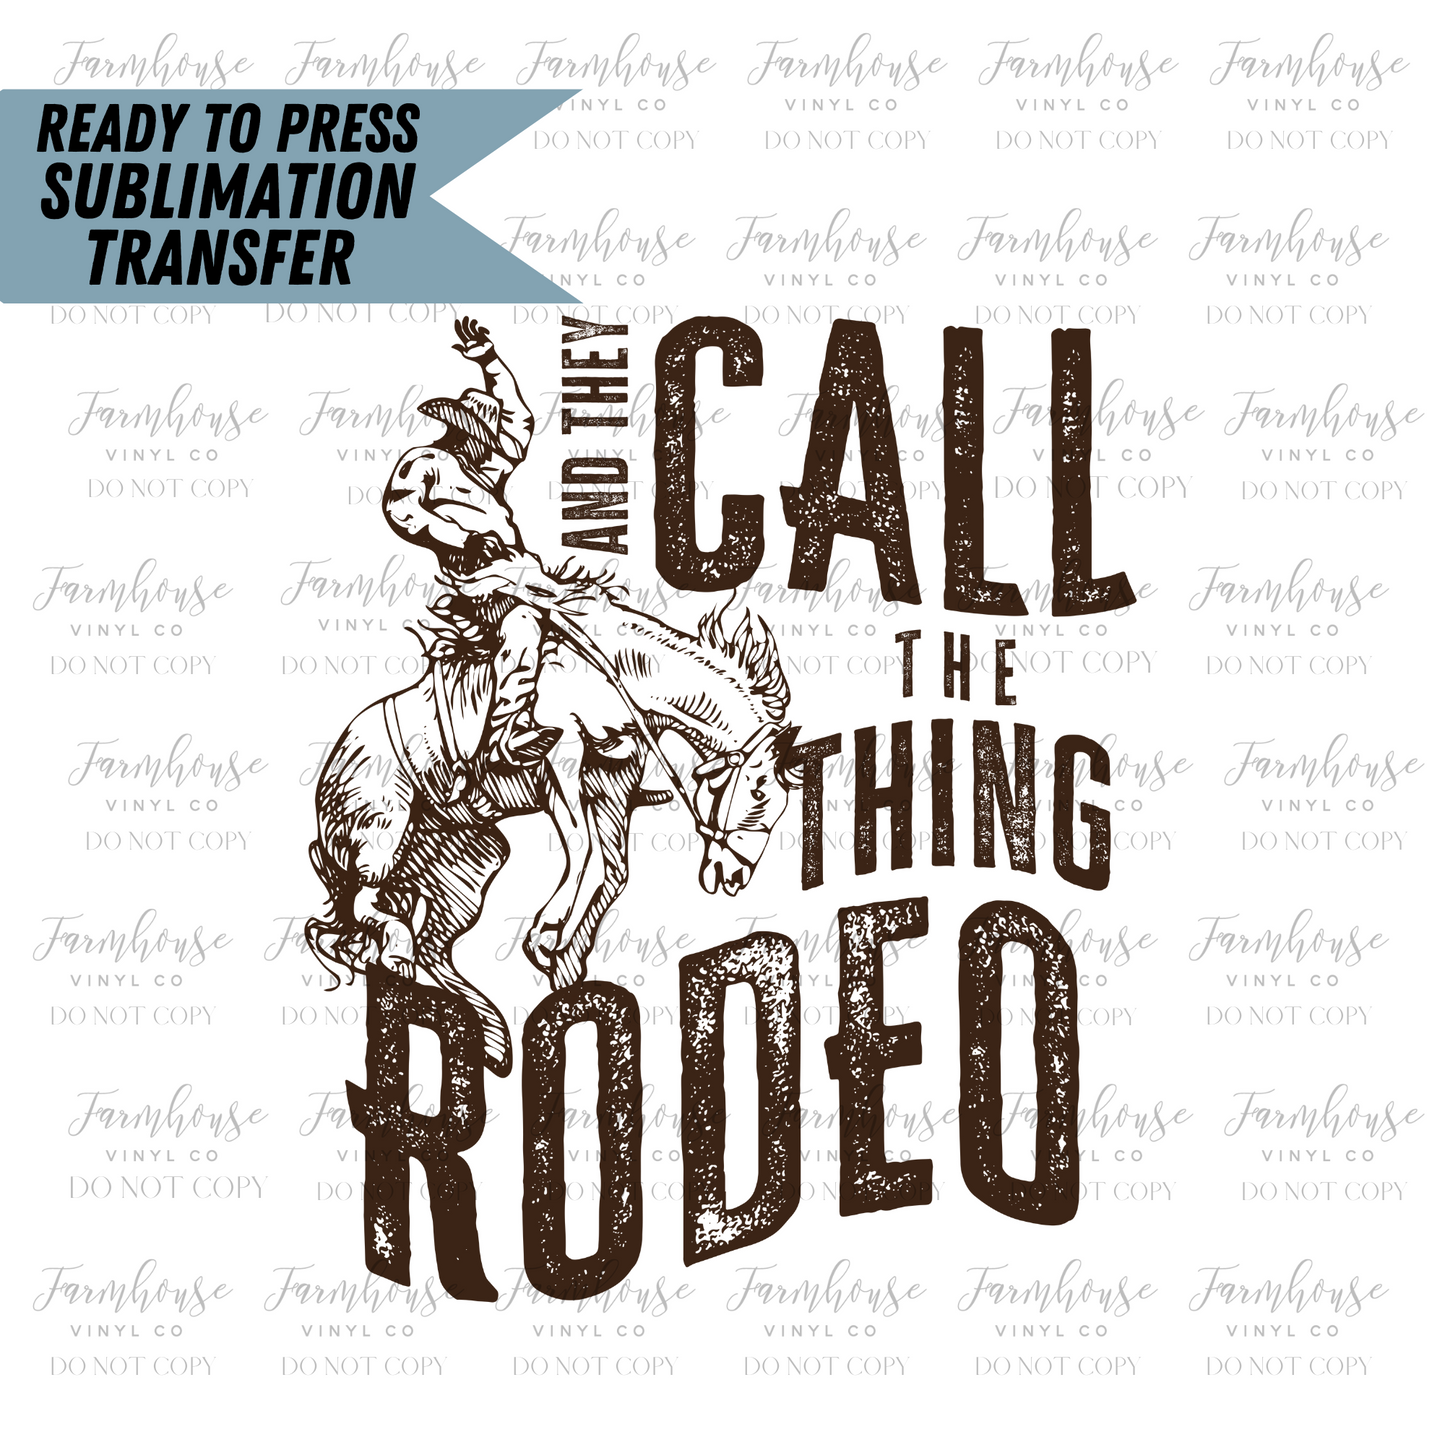 And They Call the Thing Rodeo Ready to Press Sublimation Transfer - Farmhouse Vinyl Co